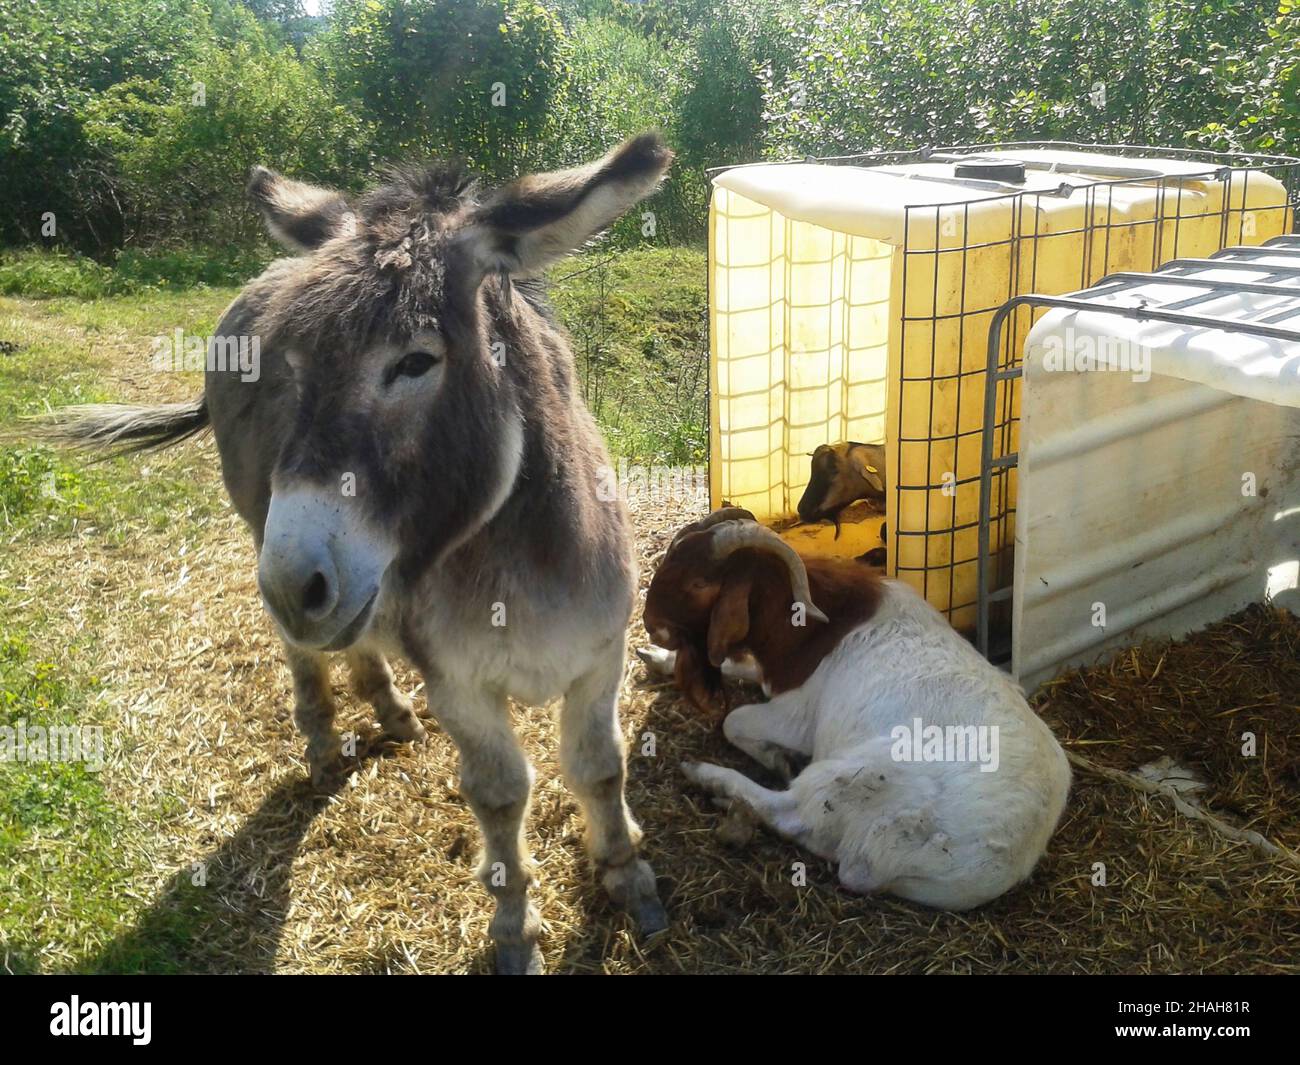 Farm animals donkey and two goats graze in the summer outdoors near the corral Stock Photo